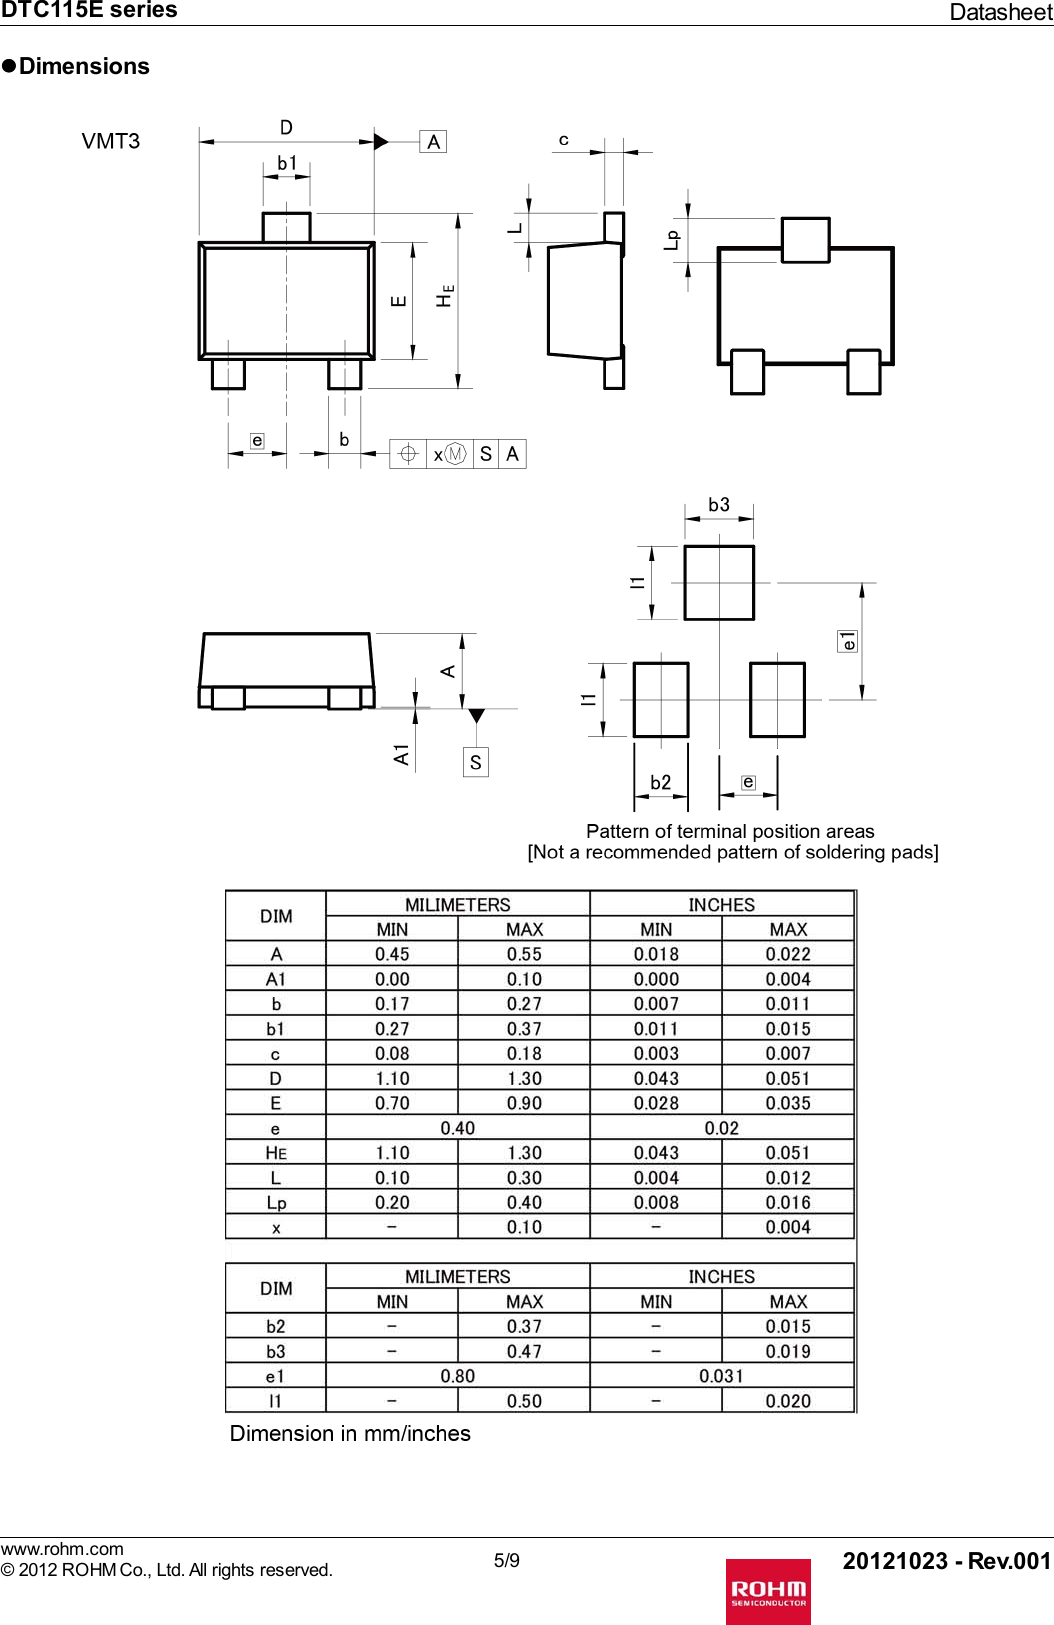 Page 5 of 11 - DTC115E Series - Datasheet. Www.s-manuals.com. Rohm